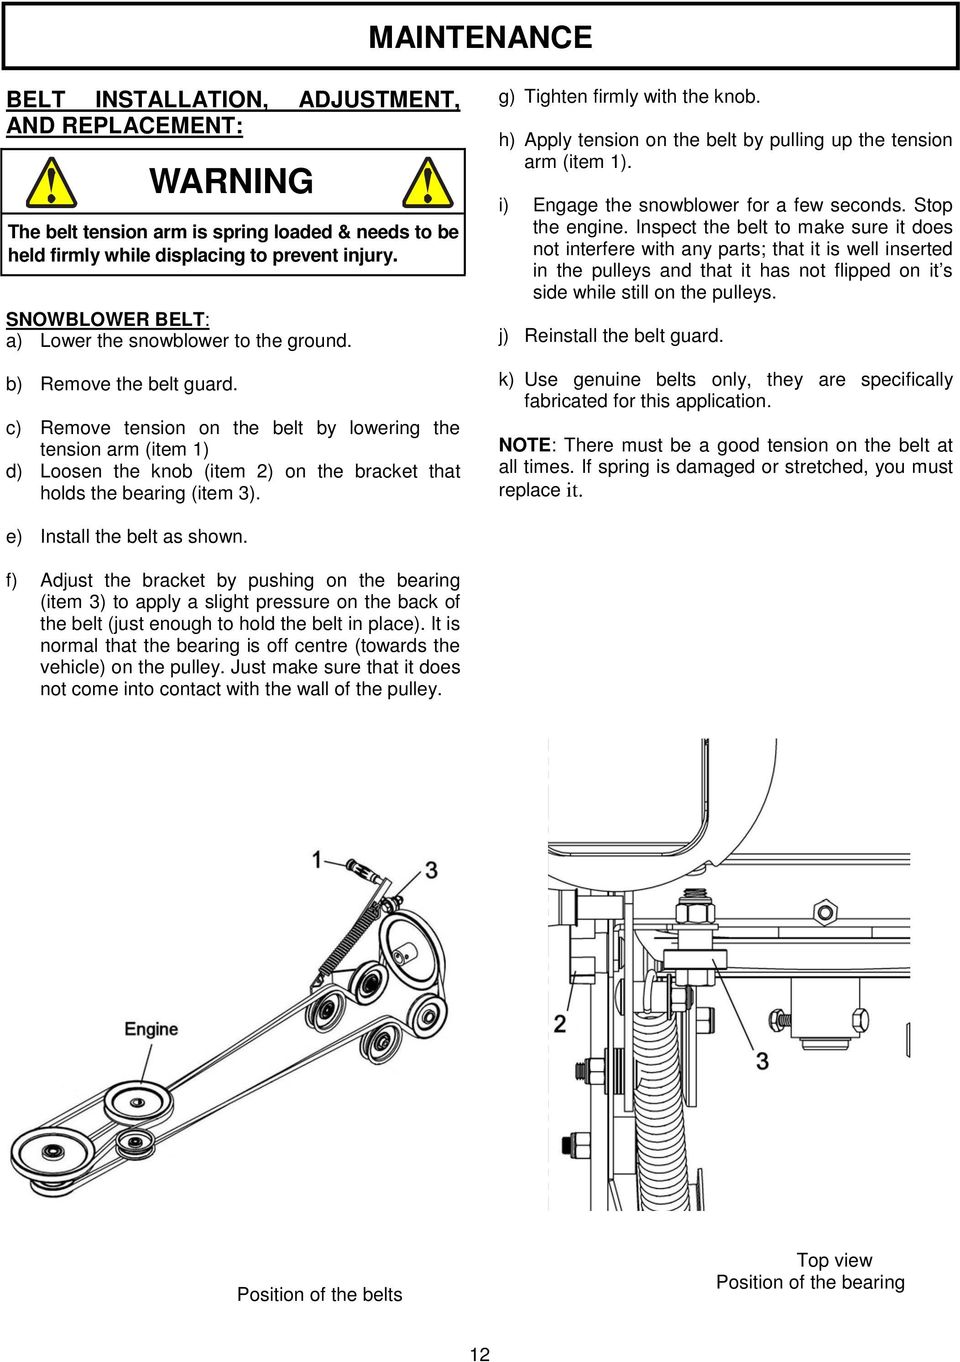 c) Remove tension on the belt by lowering the tension arm (item 1) d) Loosen the knob (item 2) on the bracket that holds the bearing (item 3). g) Tighten firmly with the knob.